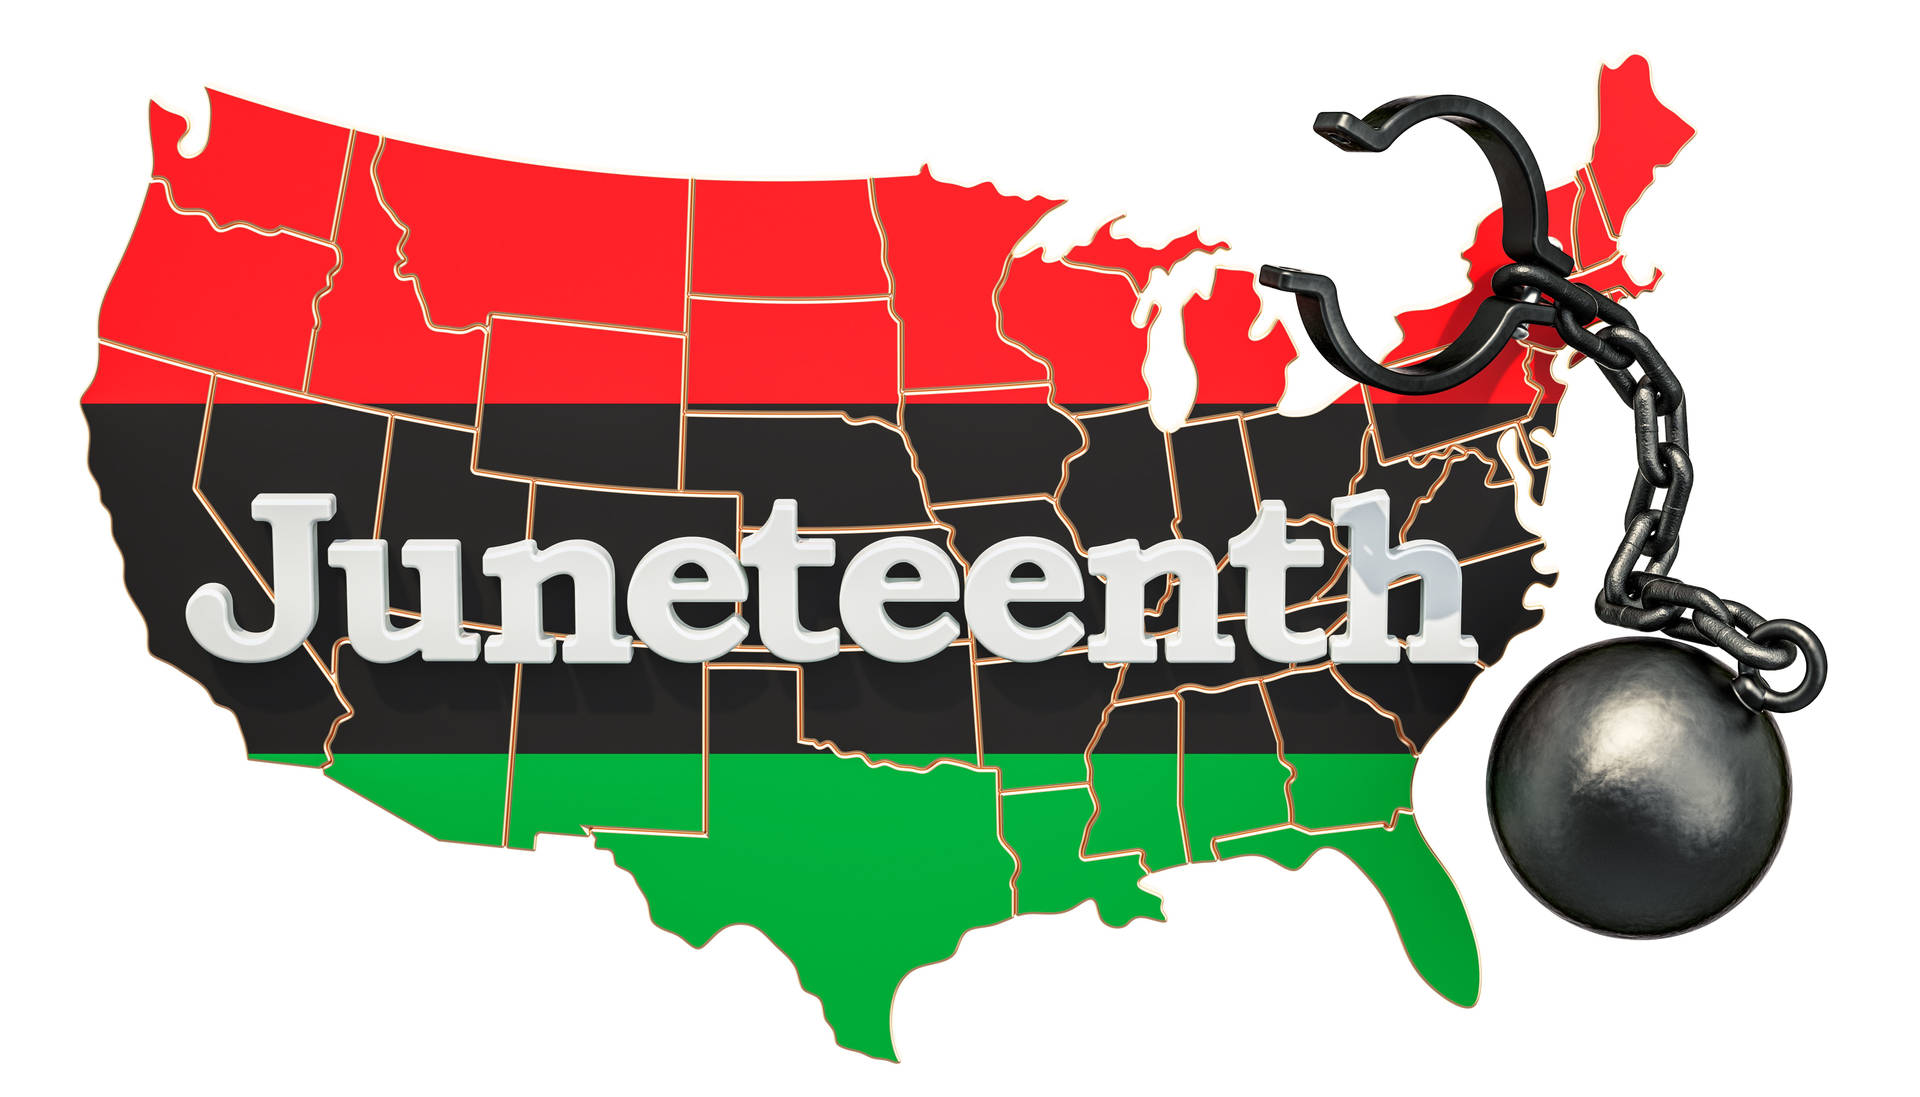 Juneteenth Ball And Chain Illustration Background